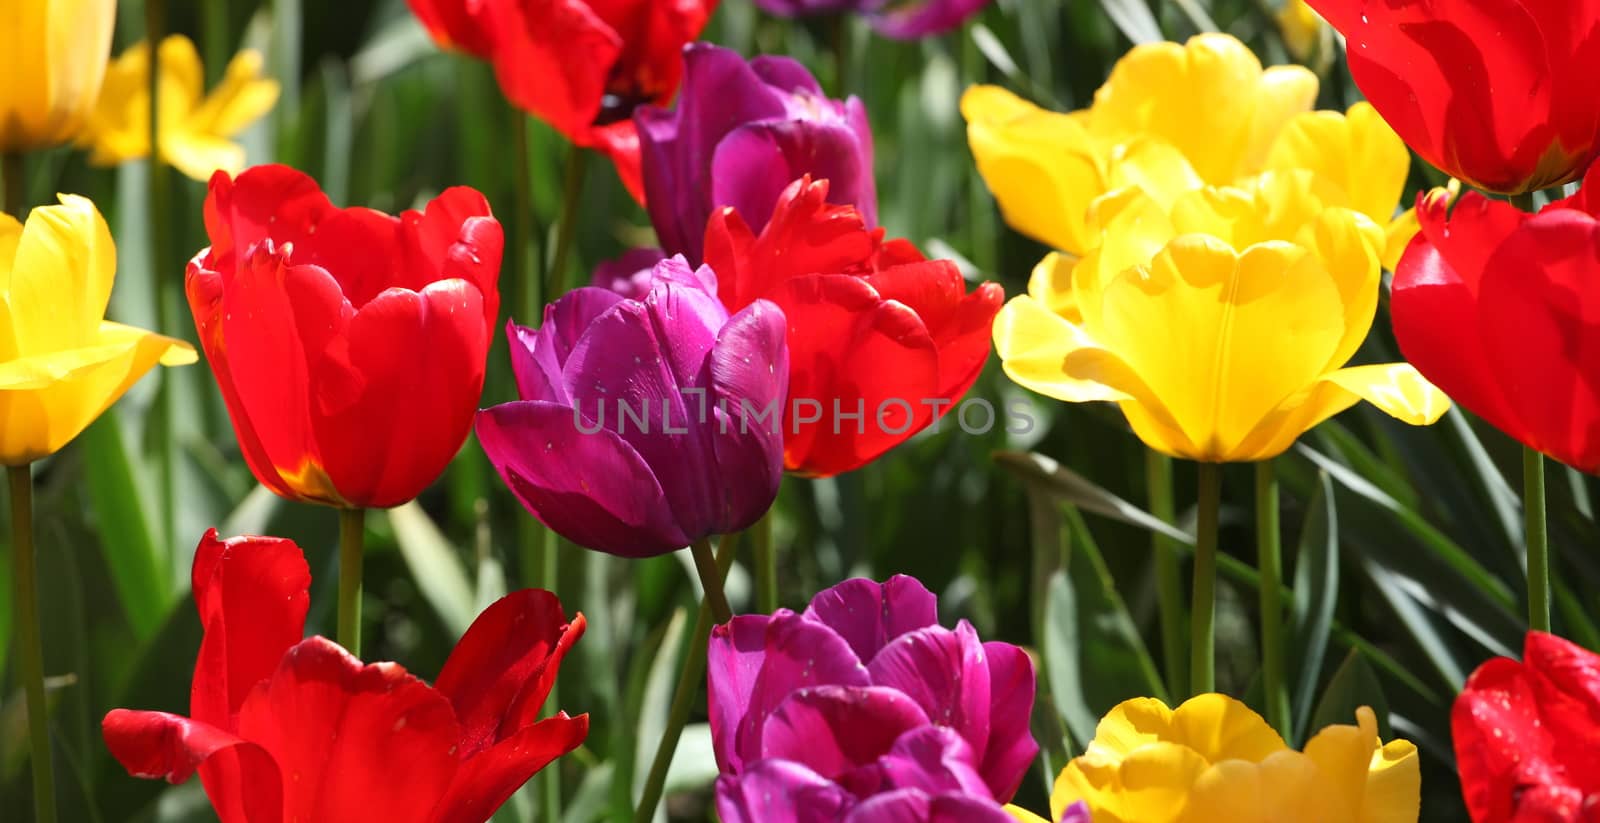 Colorful tulips in Amsterdam, Netherlands.